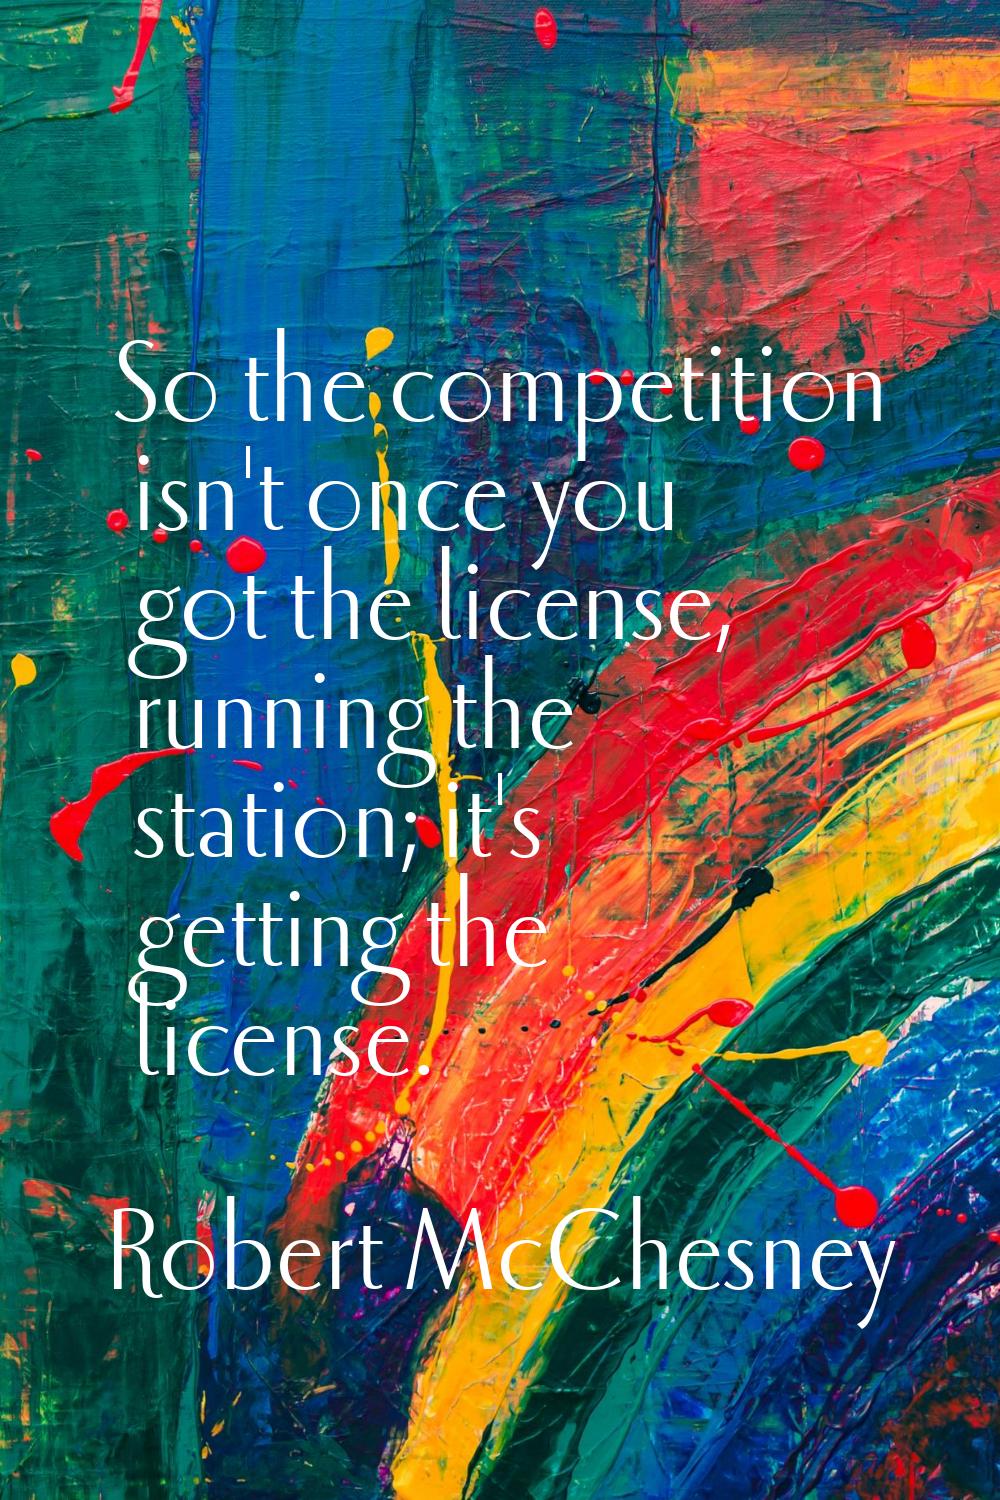 So the competition isn't once you got the license, running the station; it's getting the license.